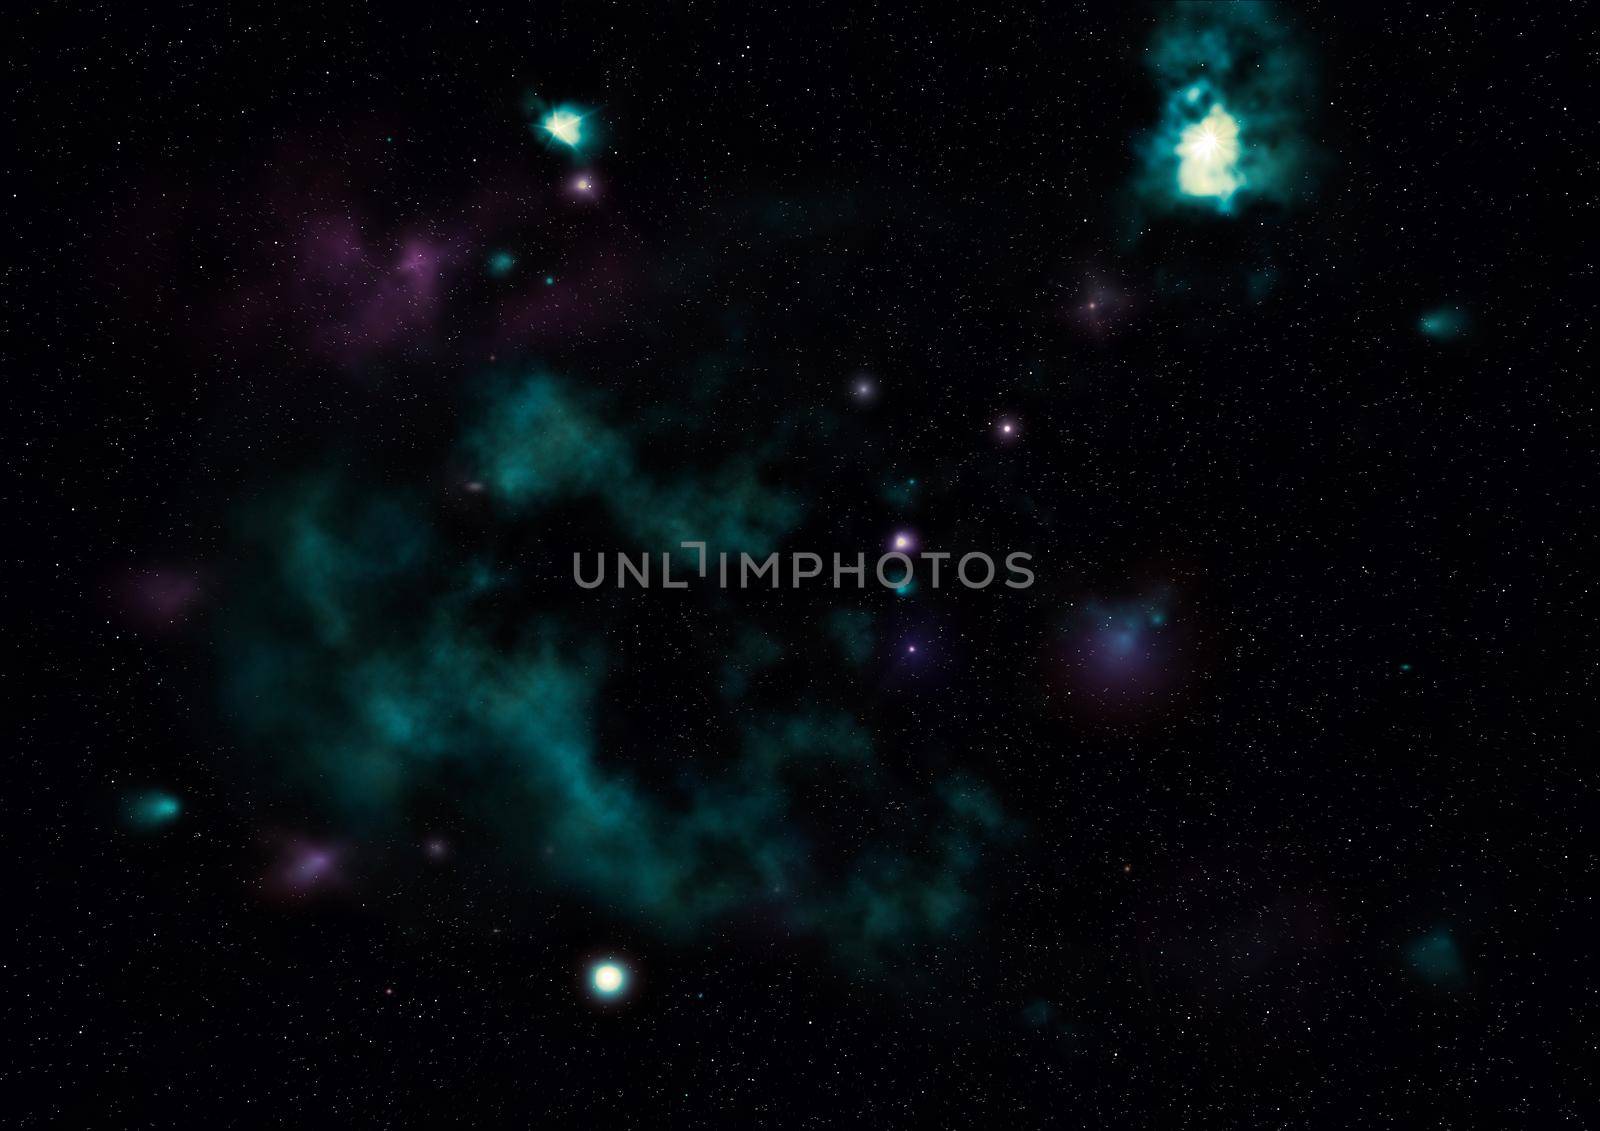 Star field in space a nebulae and a gas congestion. Elements of this image furnished by NASA .